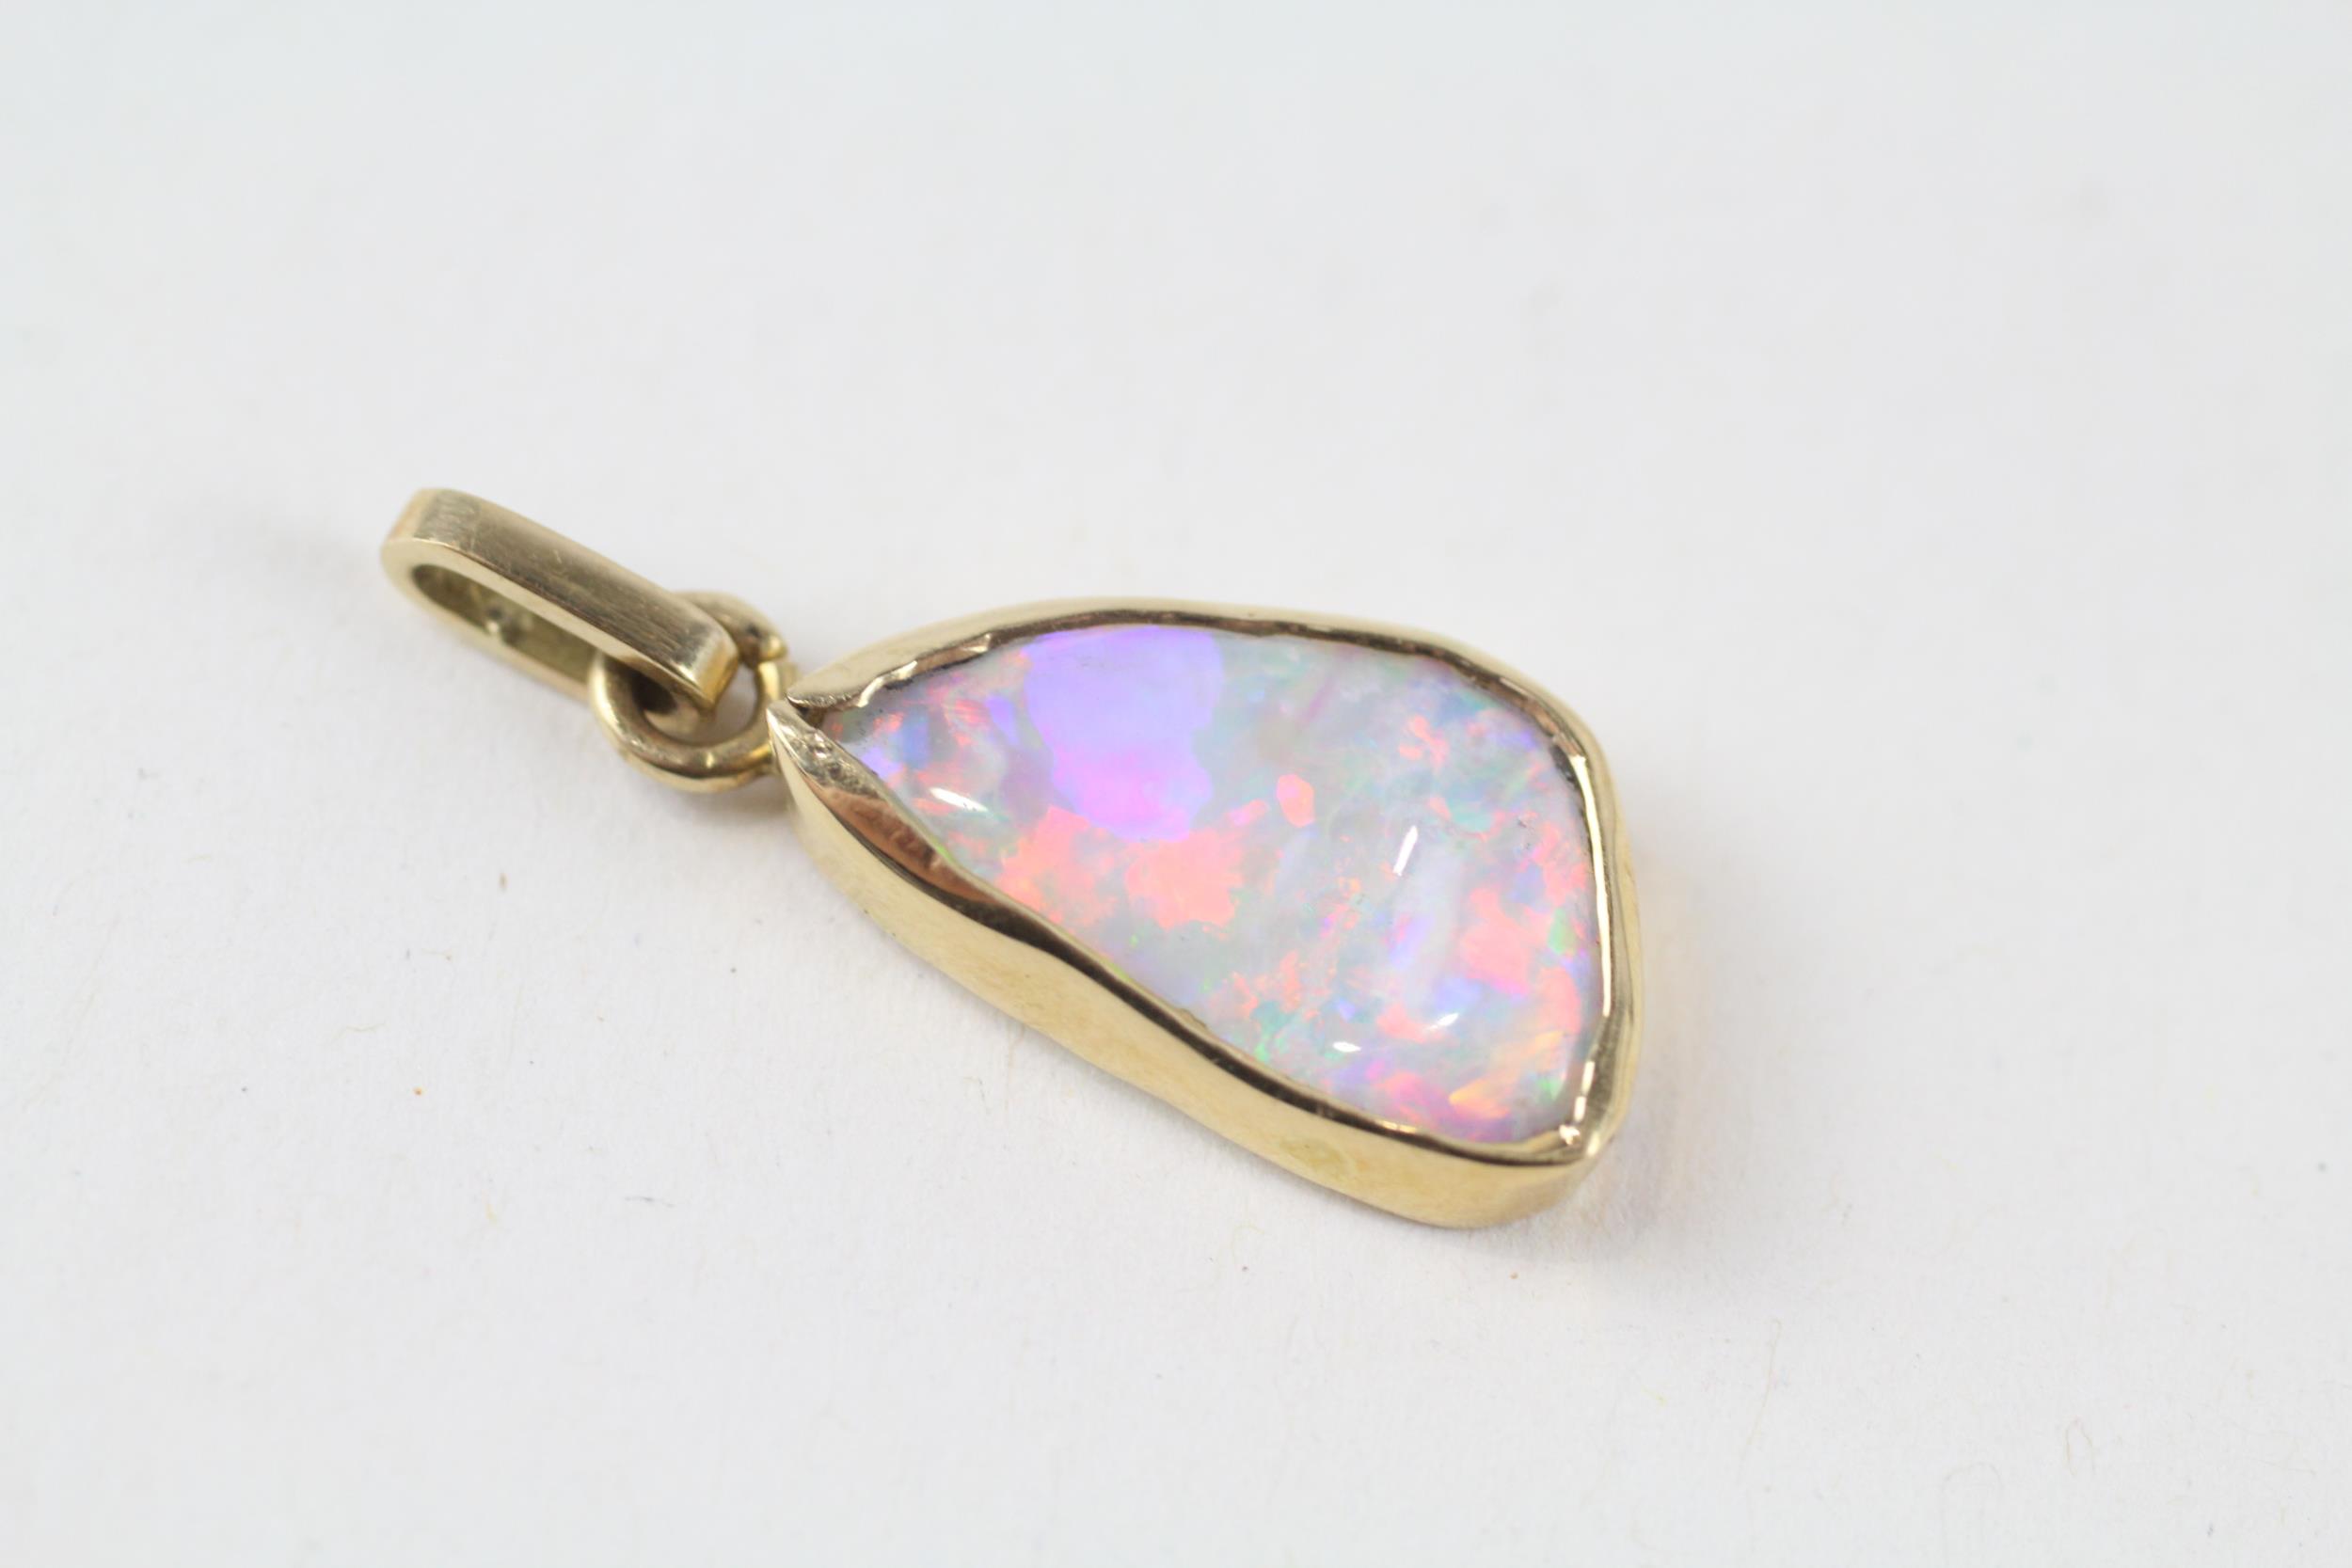 18ct gold opal pendant (1.8g) - Image 2 of 4